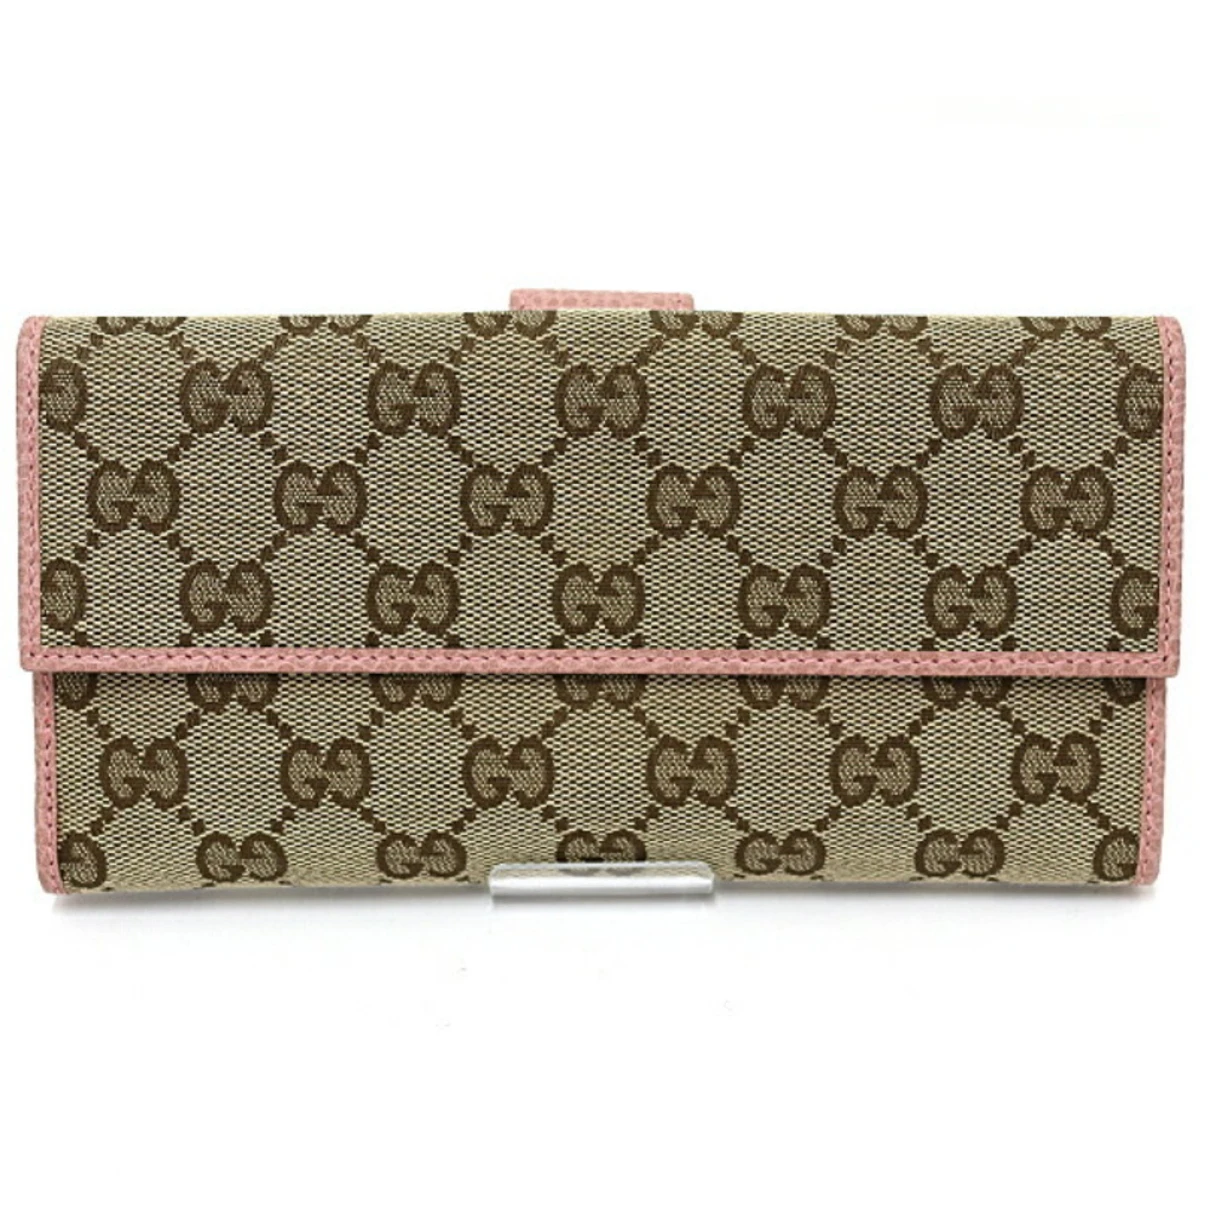 accessories Gucci wallets for Female Cloth. Used condition